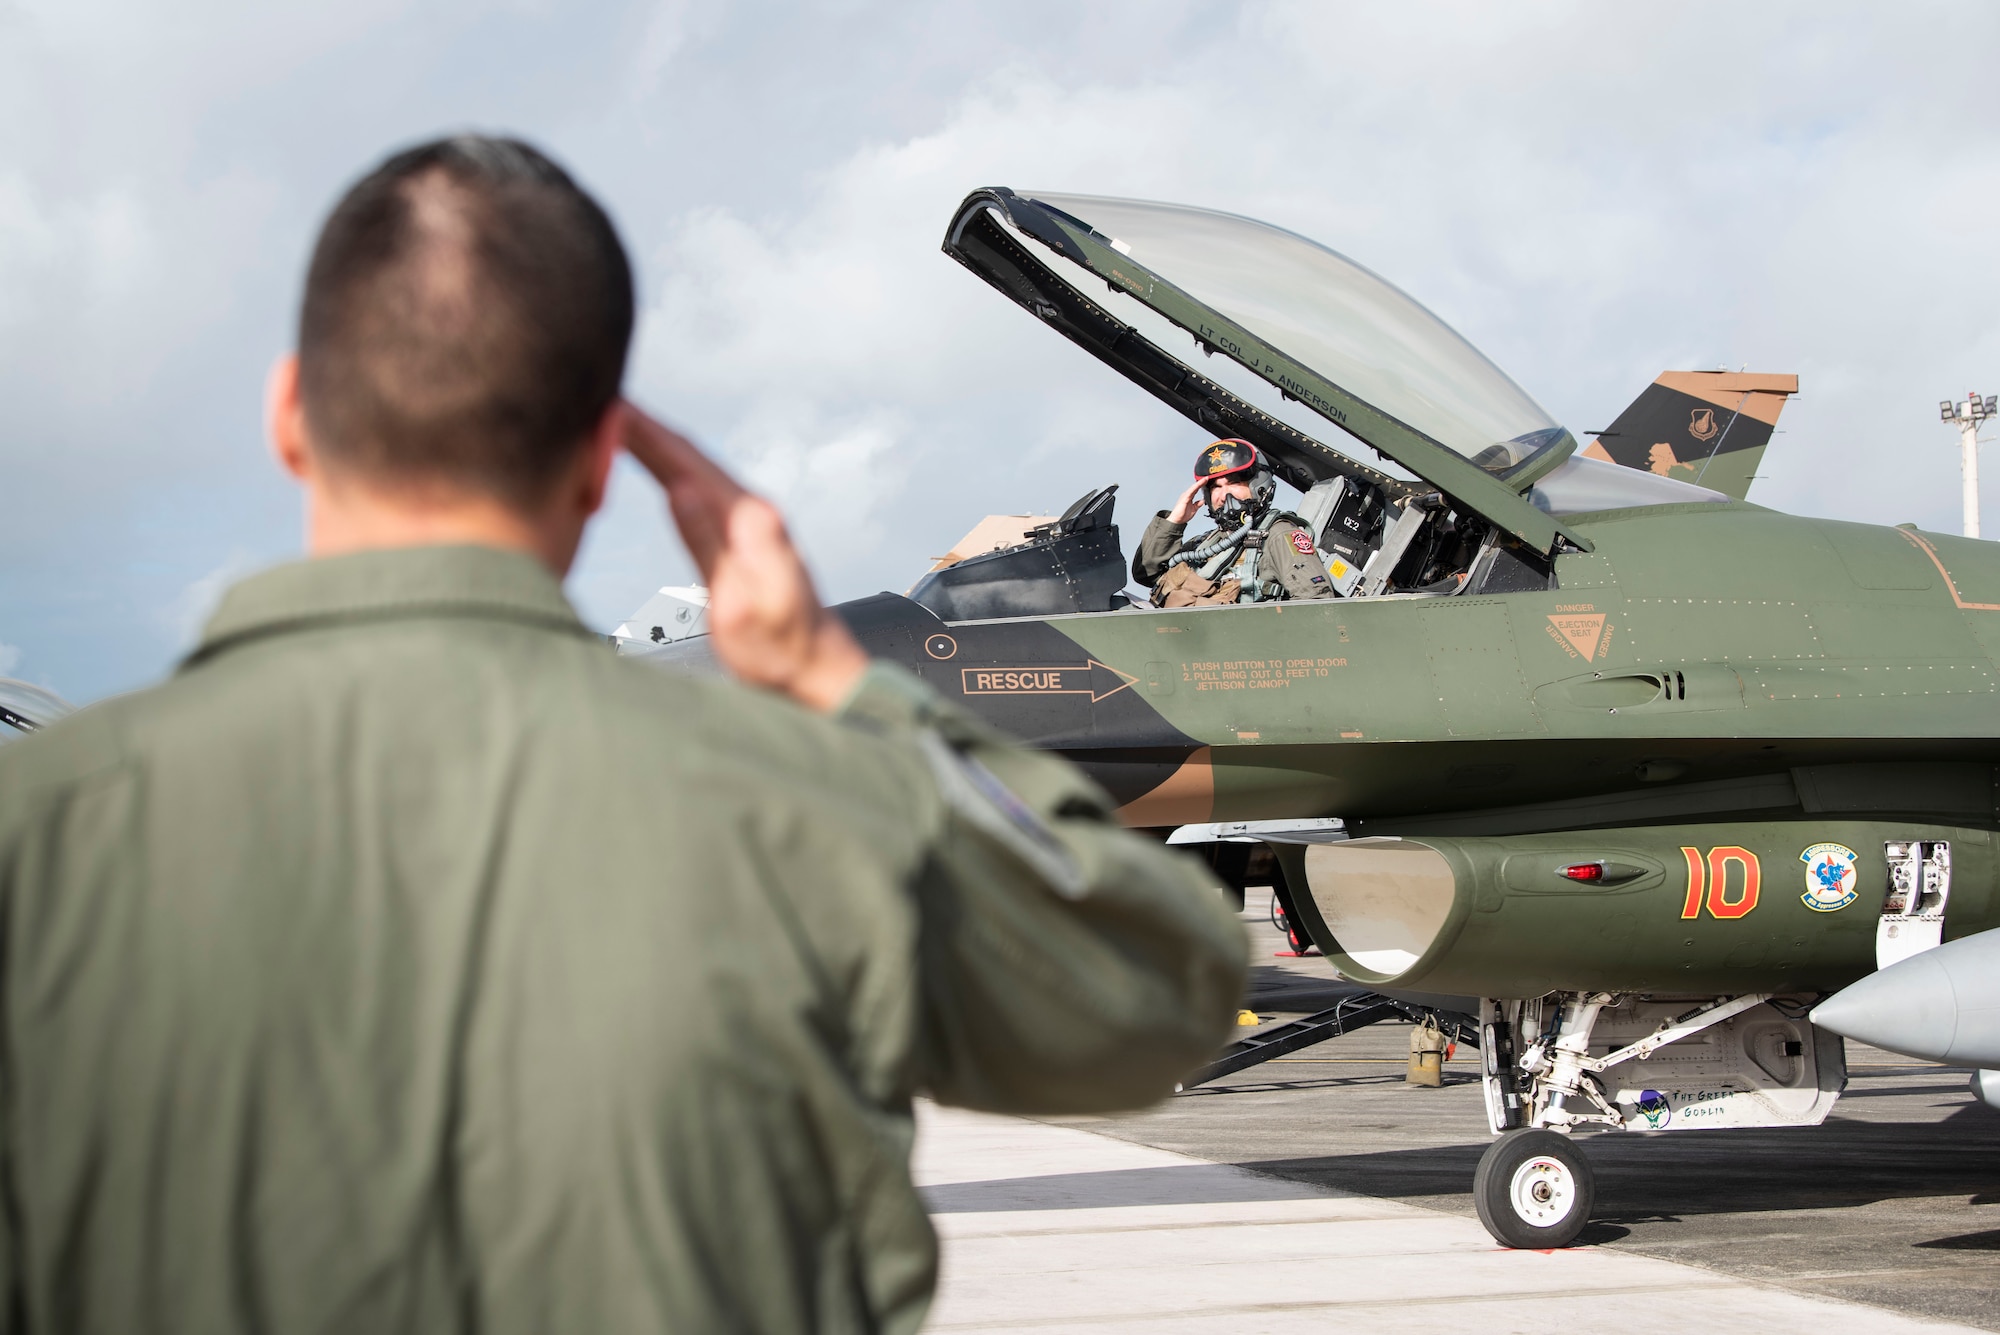 Lt. Col. Julio Rodriguez salutes his brother Lt. Col. Antonio Rodriguez before takeoff in an F-16C Fighting Falcon February 27, 2020 at Andersen Air Force Base, Guam.